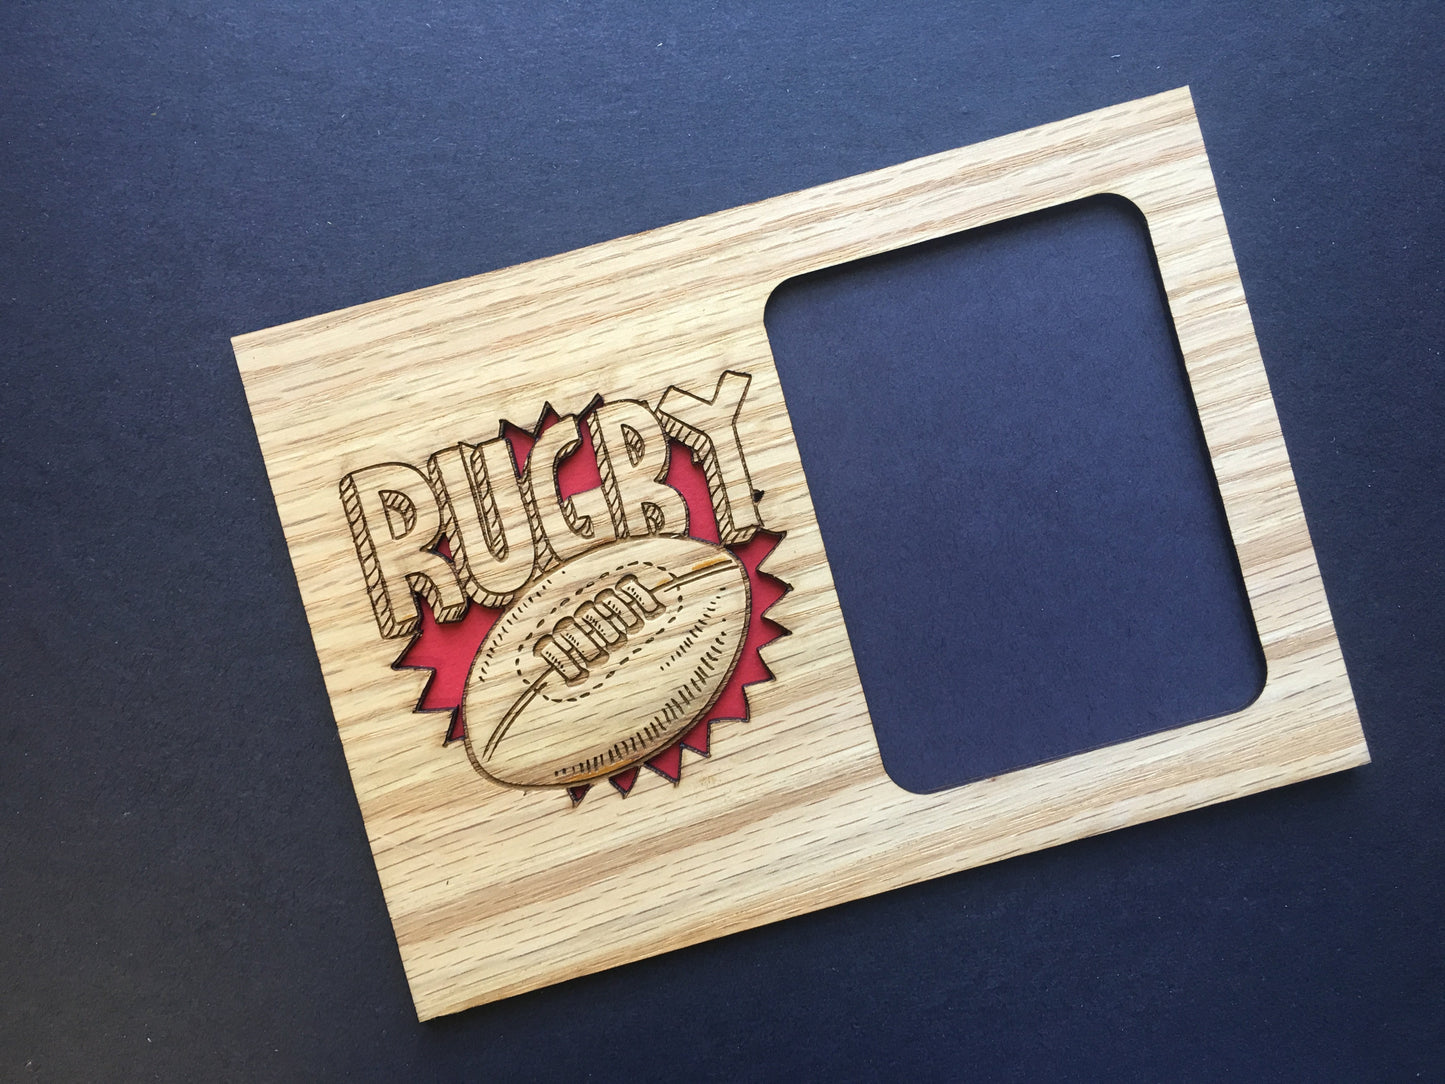 5x7 Rugby Picture Frame-Legacy Images